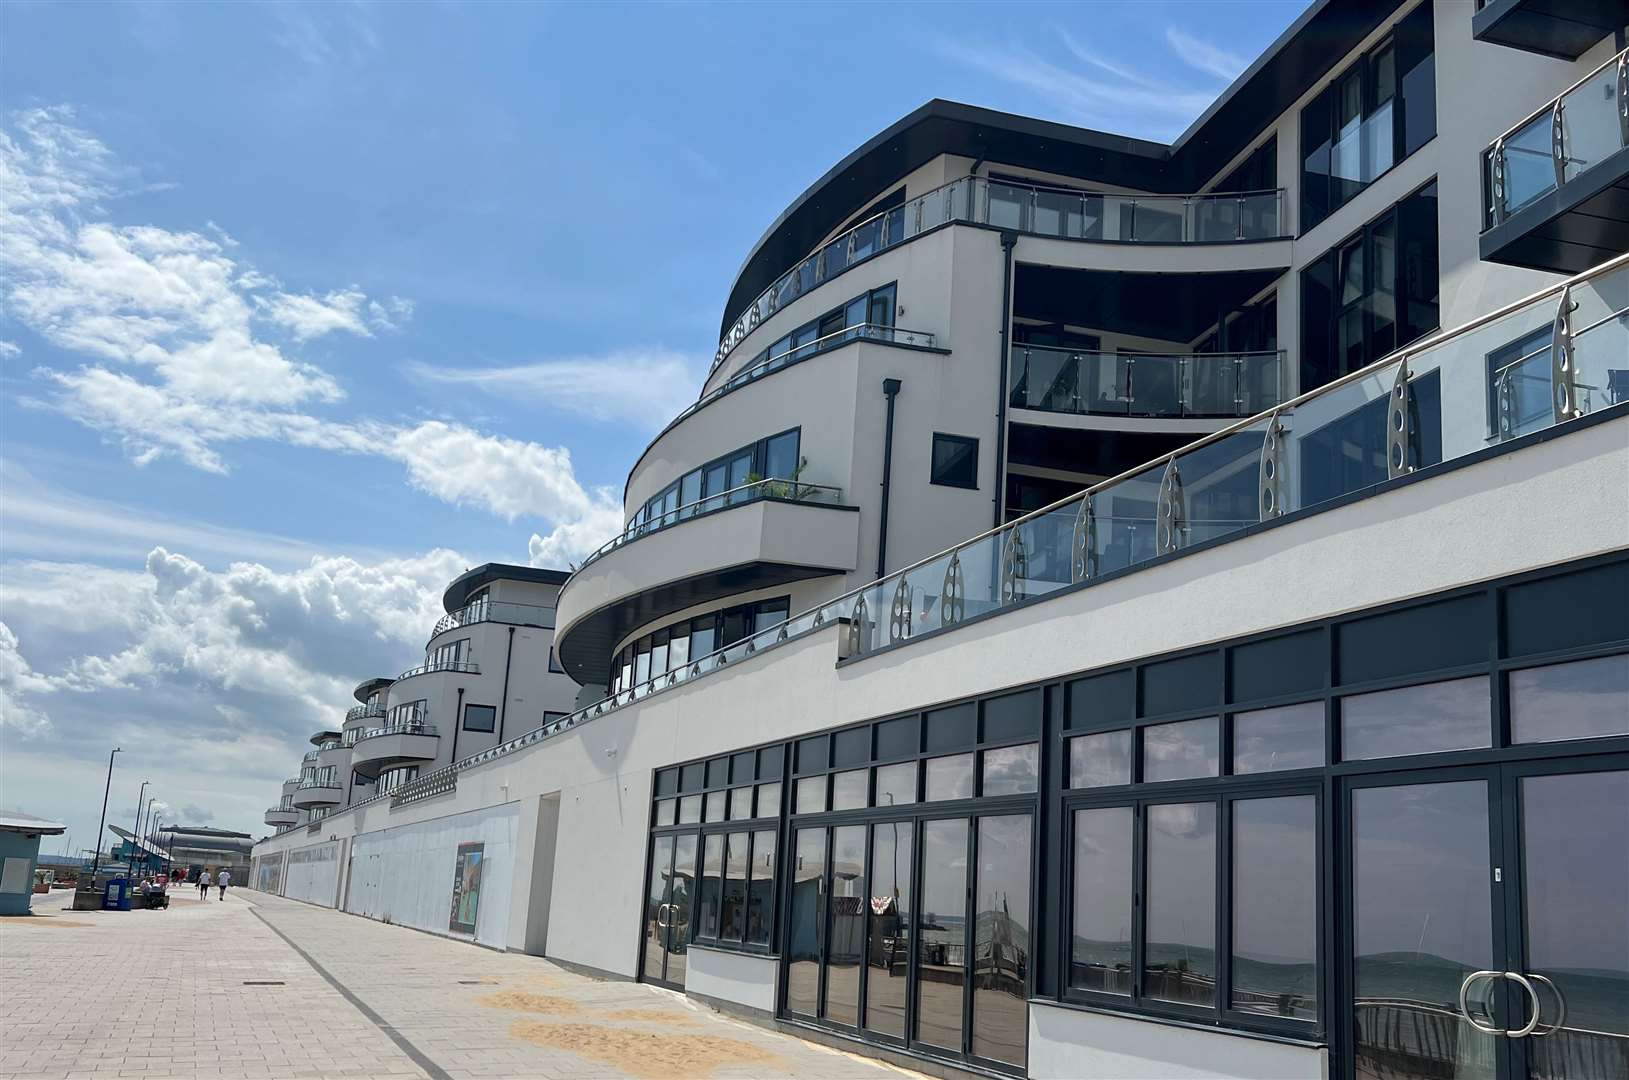 The Royal Sands development will eventually have a string of shops, restaurants and cafes sat below the swanky apartments